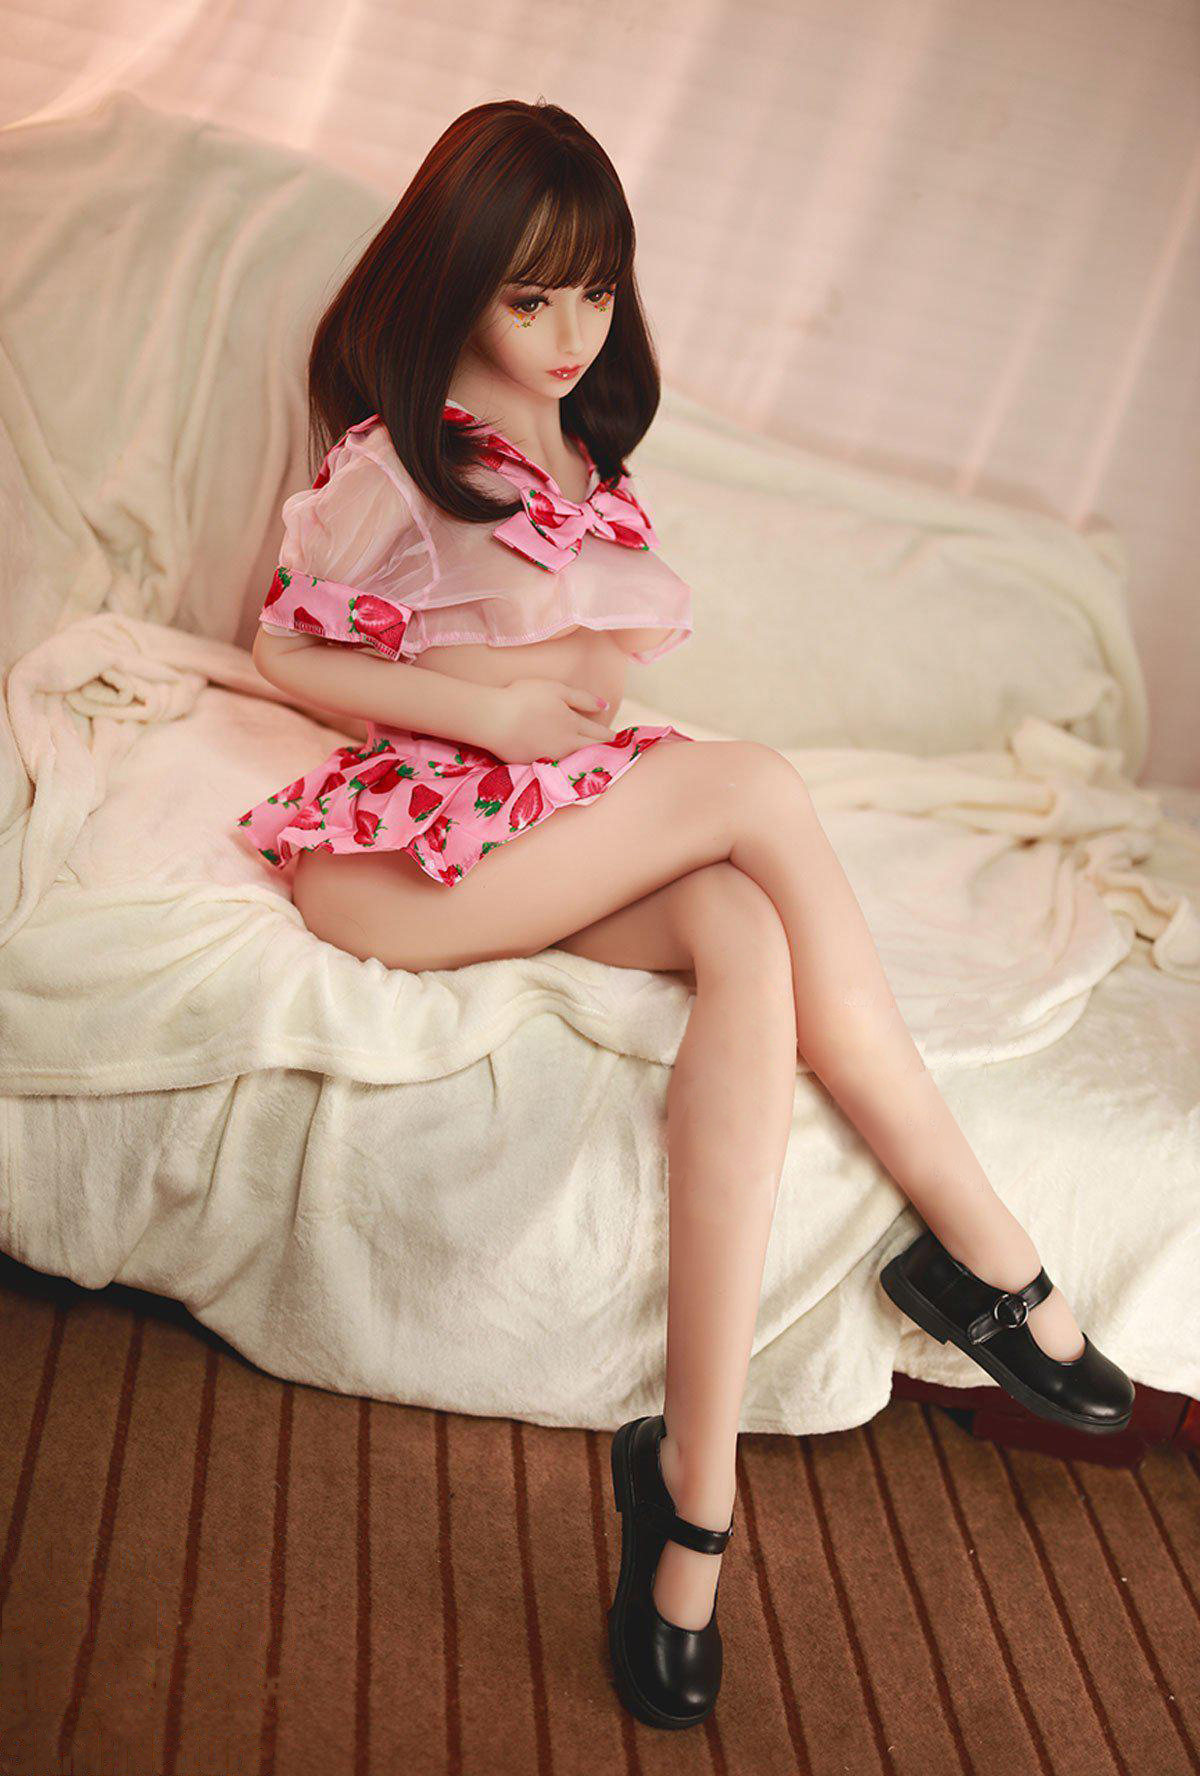 Lilly-Cute-Asian-Sex-Doll-35